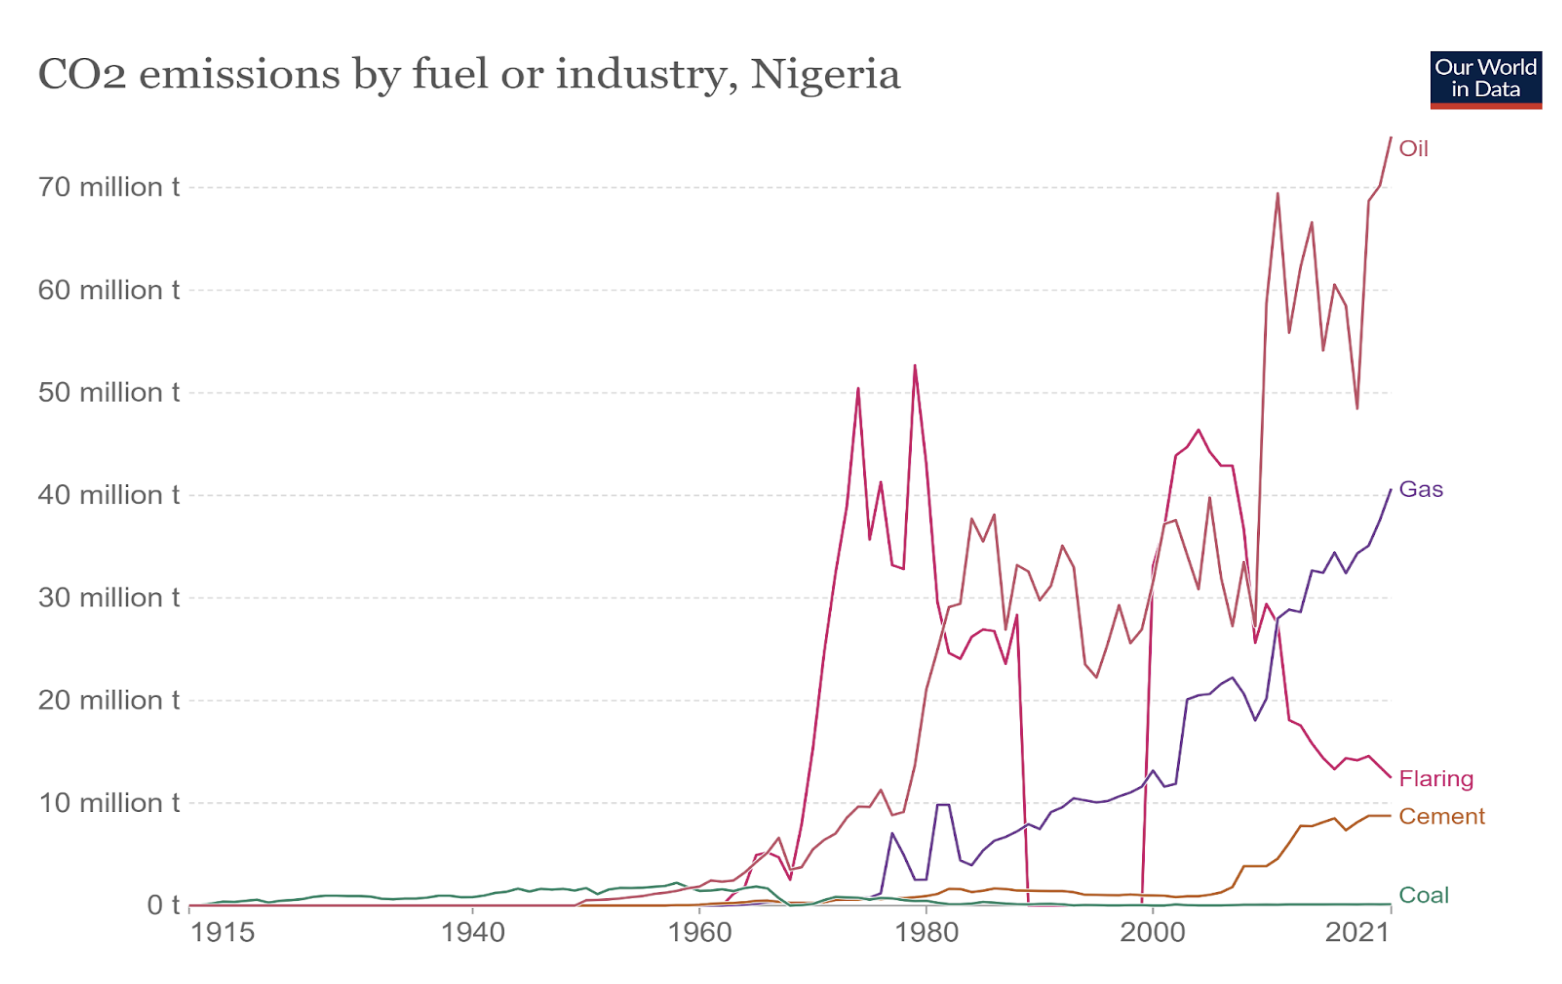 CO2 Emissions by fuel or industry, Nigeria